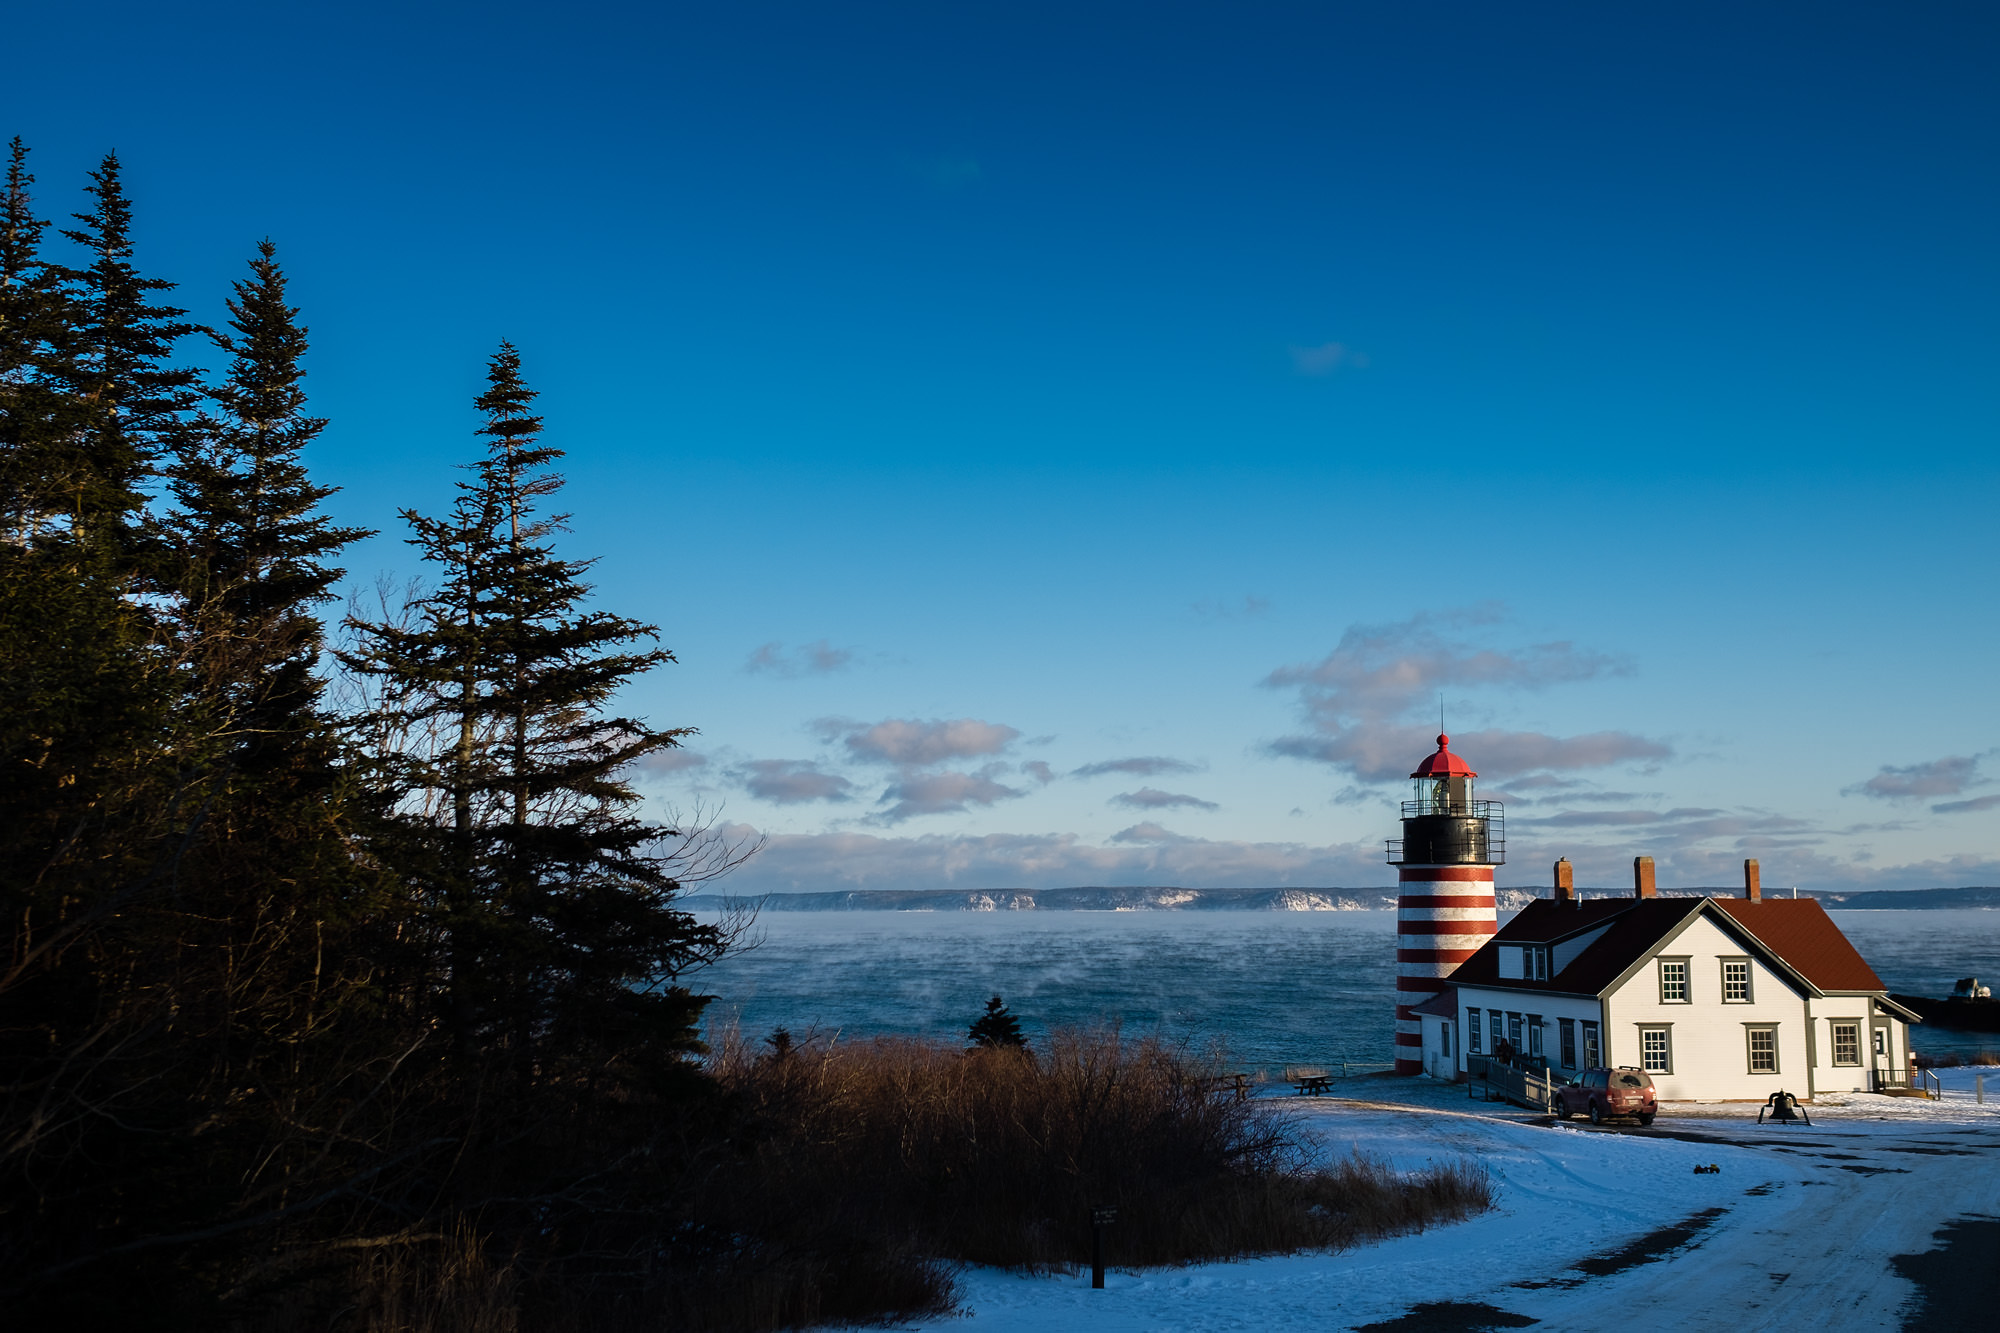 West Quoddy Head Lighthouse in Lubec, Maine